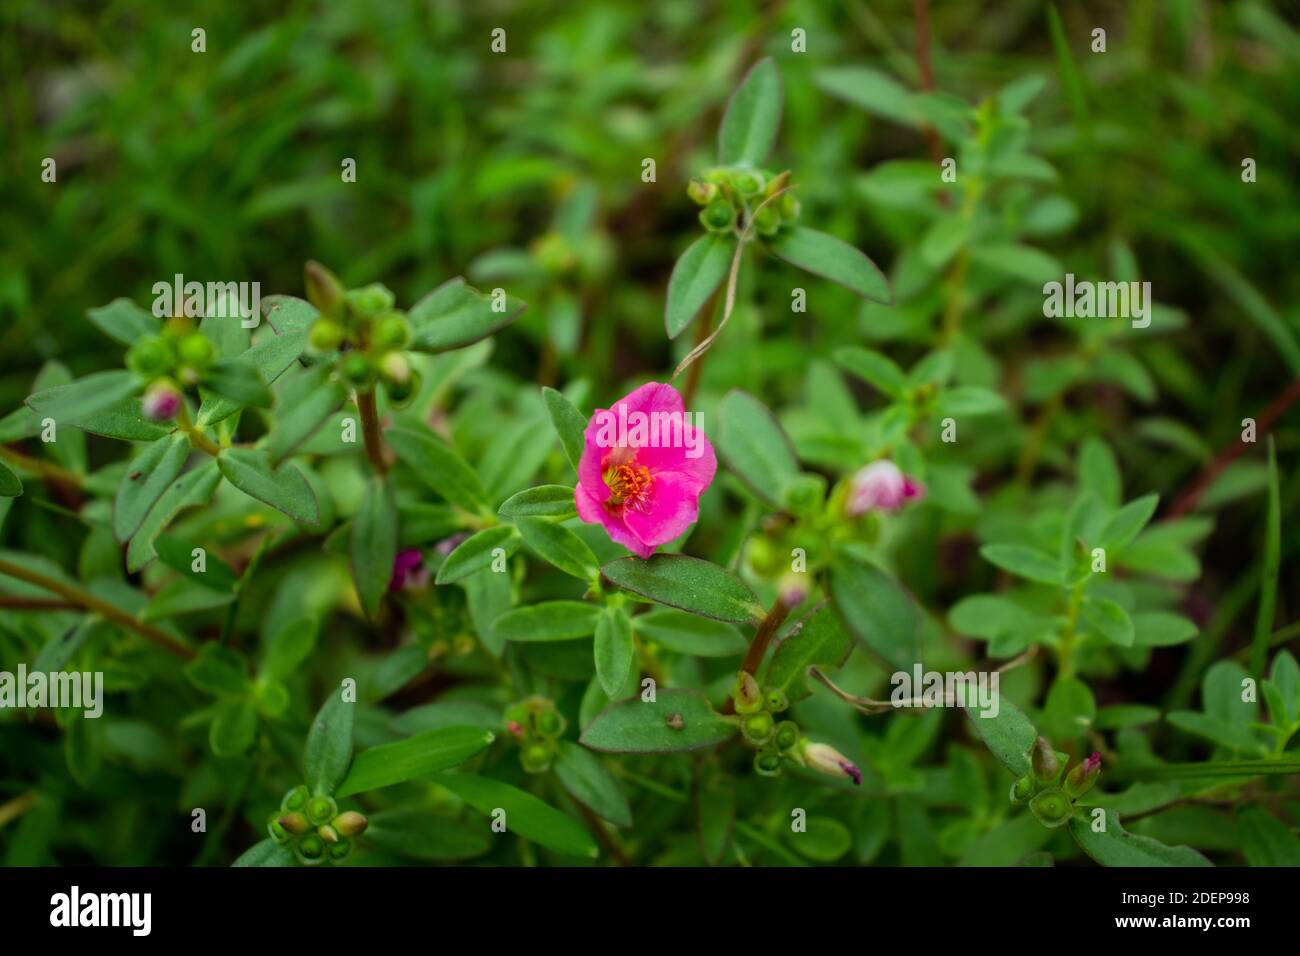 Nootka Rose The Rose Family Rosaceae Rosa Nutkana and the flowering plants Stock Photo